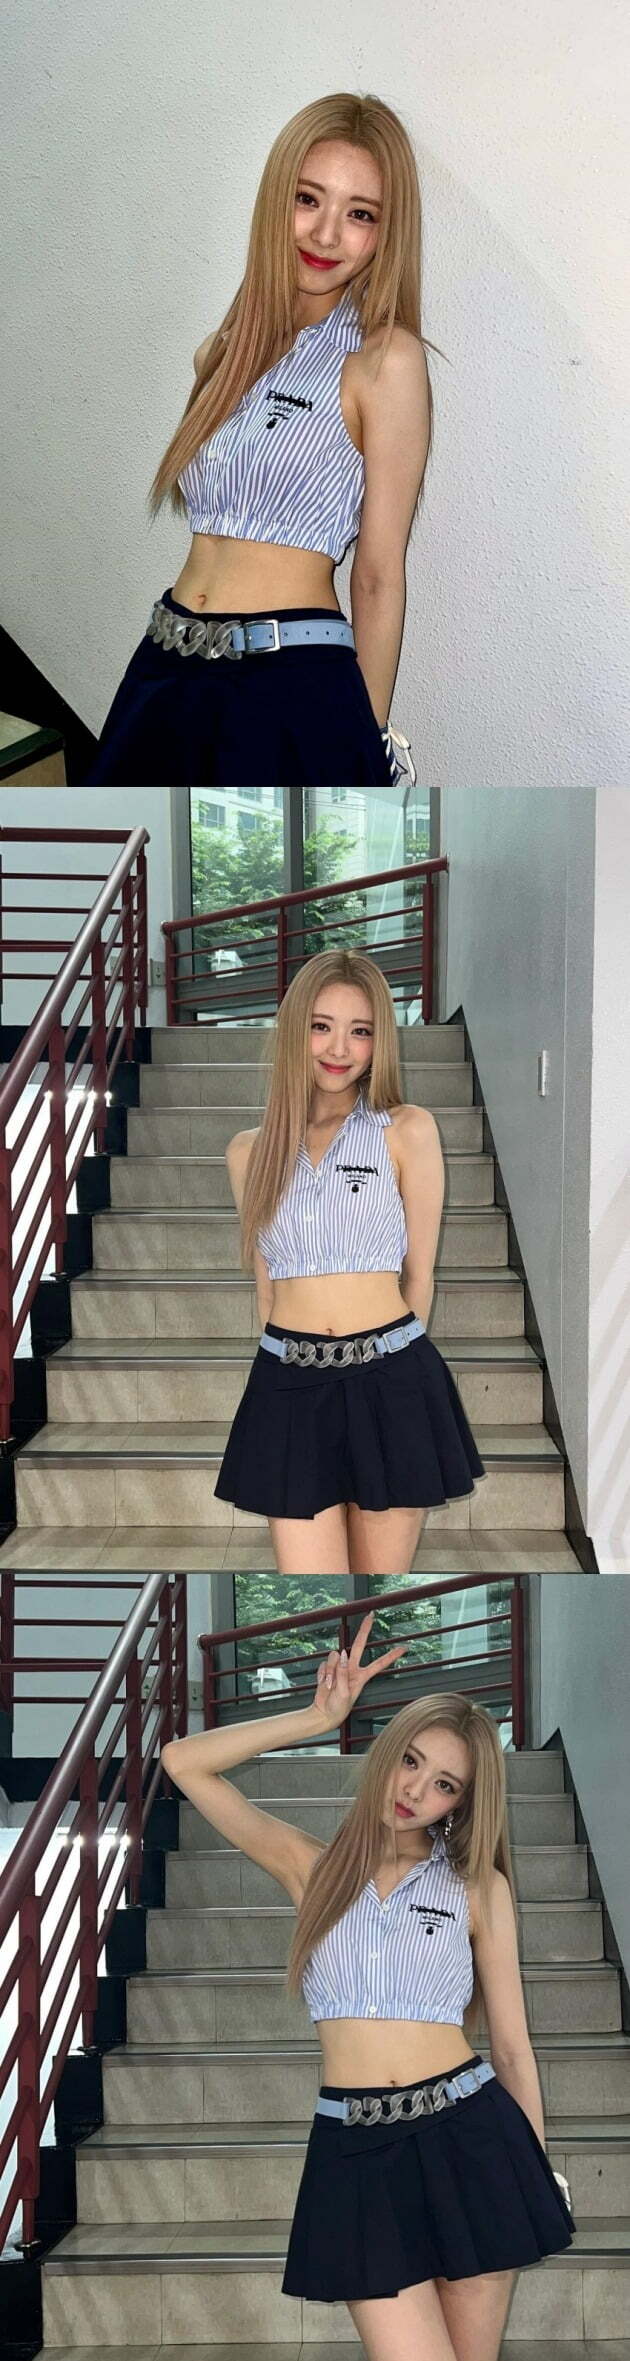 Yuna of group ITZY reported on the latest.Yuna posted a photo on her Instagram account with a butterfly emoticon on Thursday, which shows Yuna posing in a stage costume.In particular, Yuna, who has blonde hair, reveals her unique lovely charm.Meanwhile, ITZY, which Yuna belongs to, made a comeback with its new mini album, Checkmate (CHECKMATE).